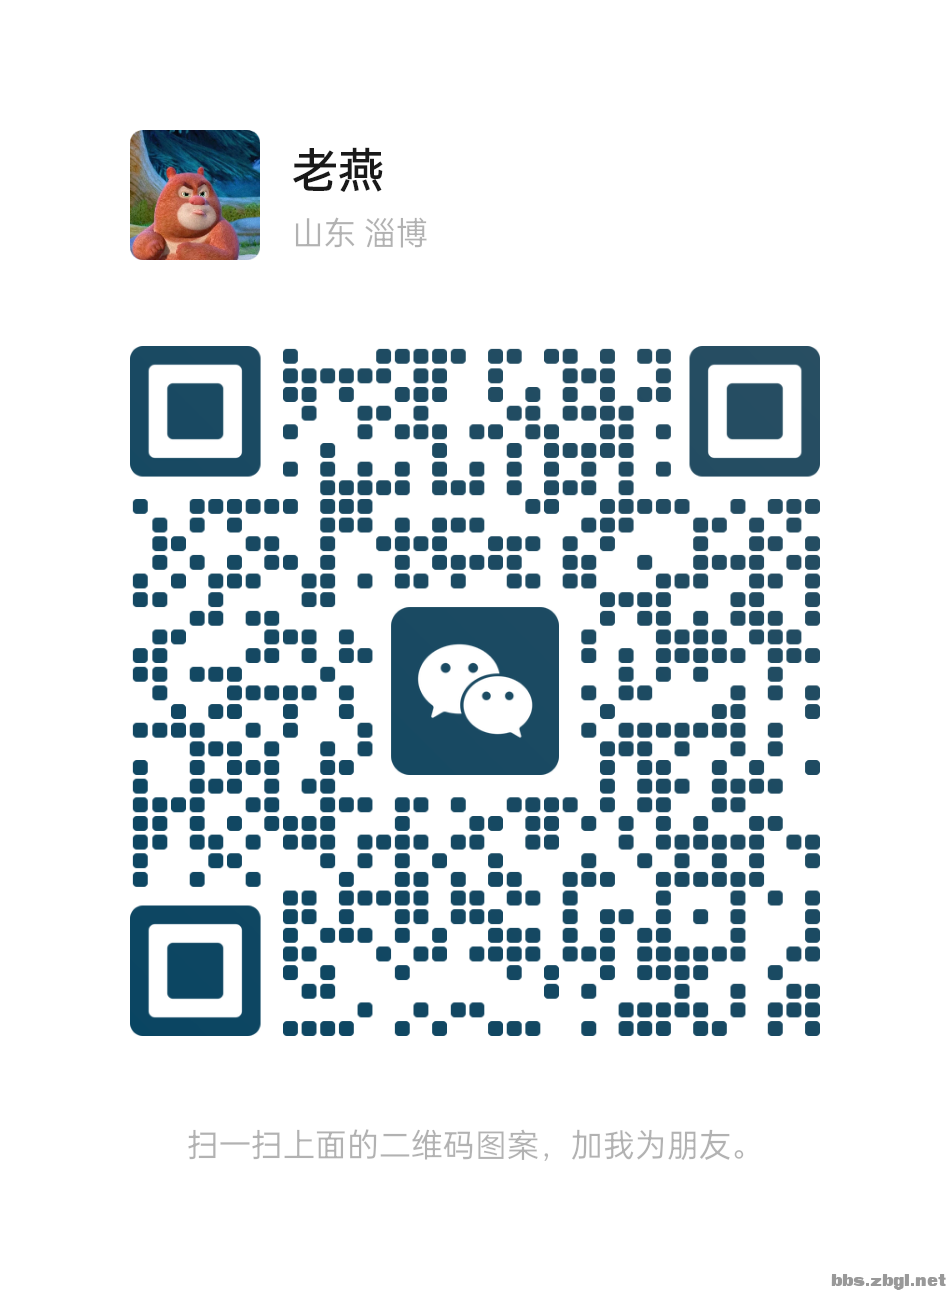 mmqrcode1669715494543.png